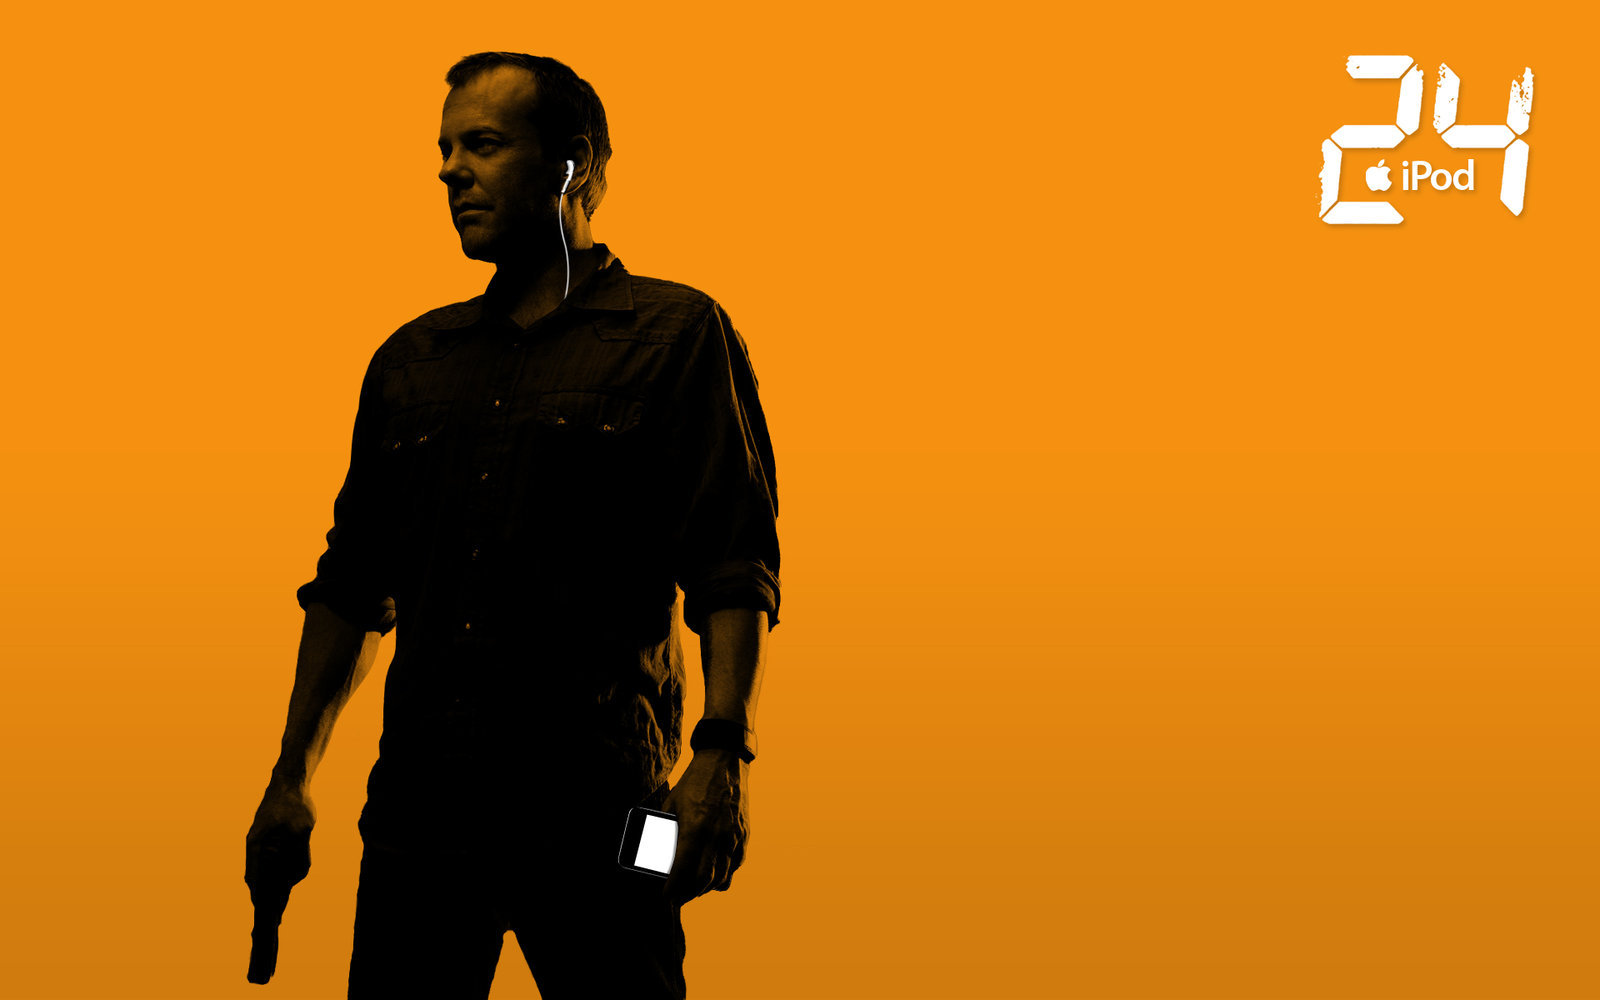 Ipod Jack Bauer By Rodriguo